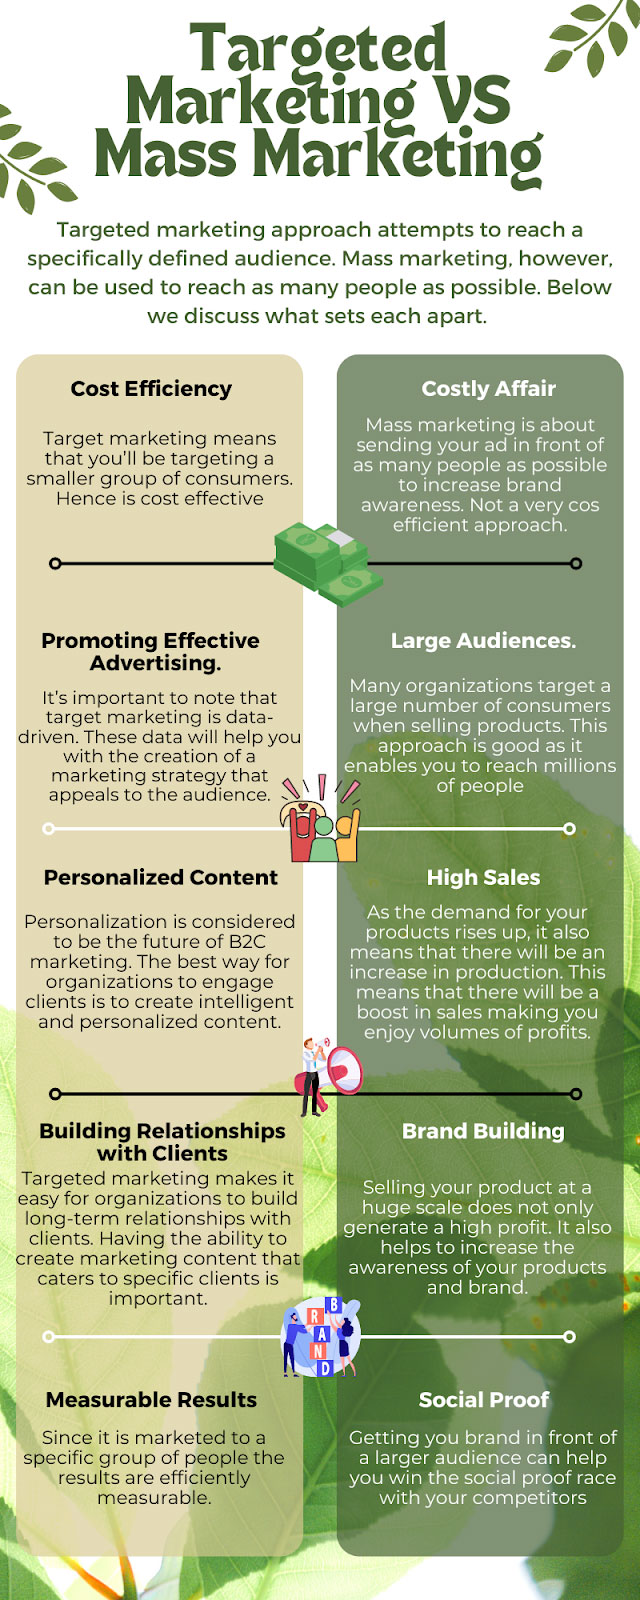 Infographic explaining the difference between targeted marketing and mass marketing